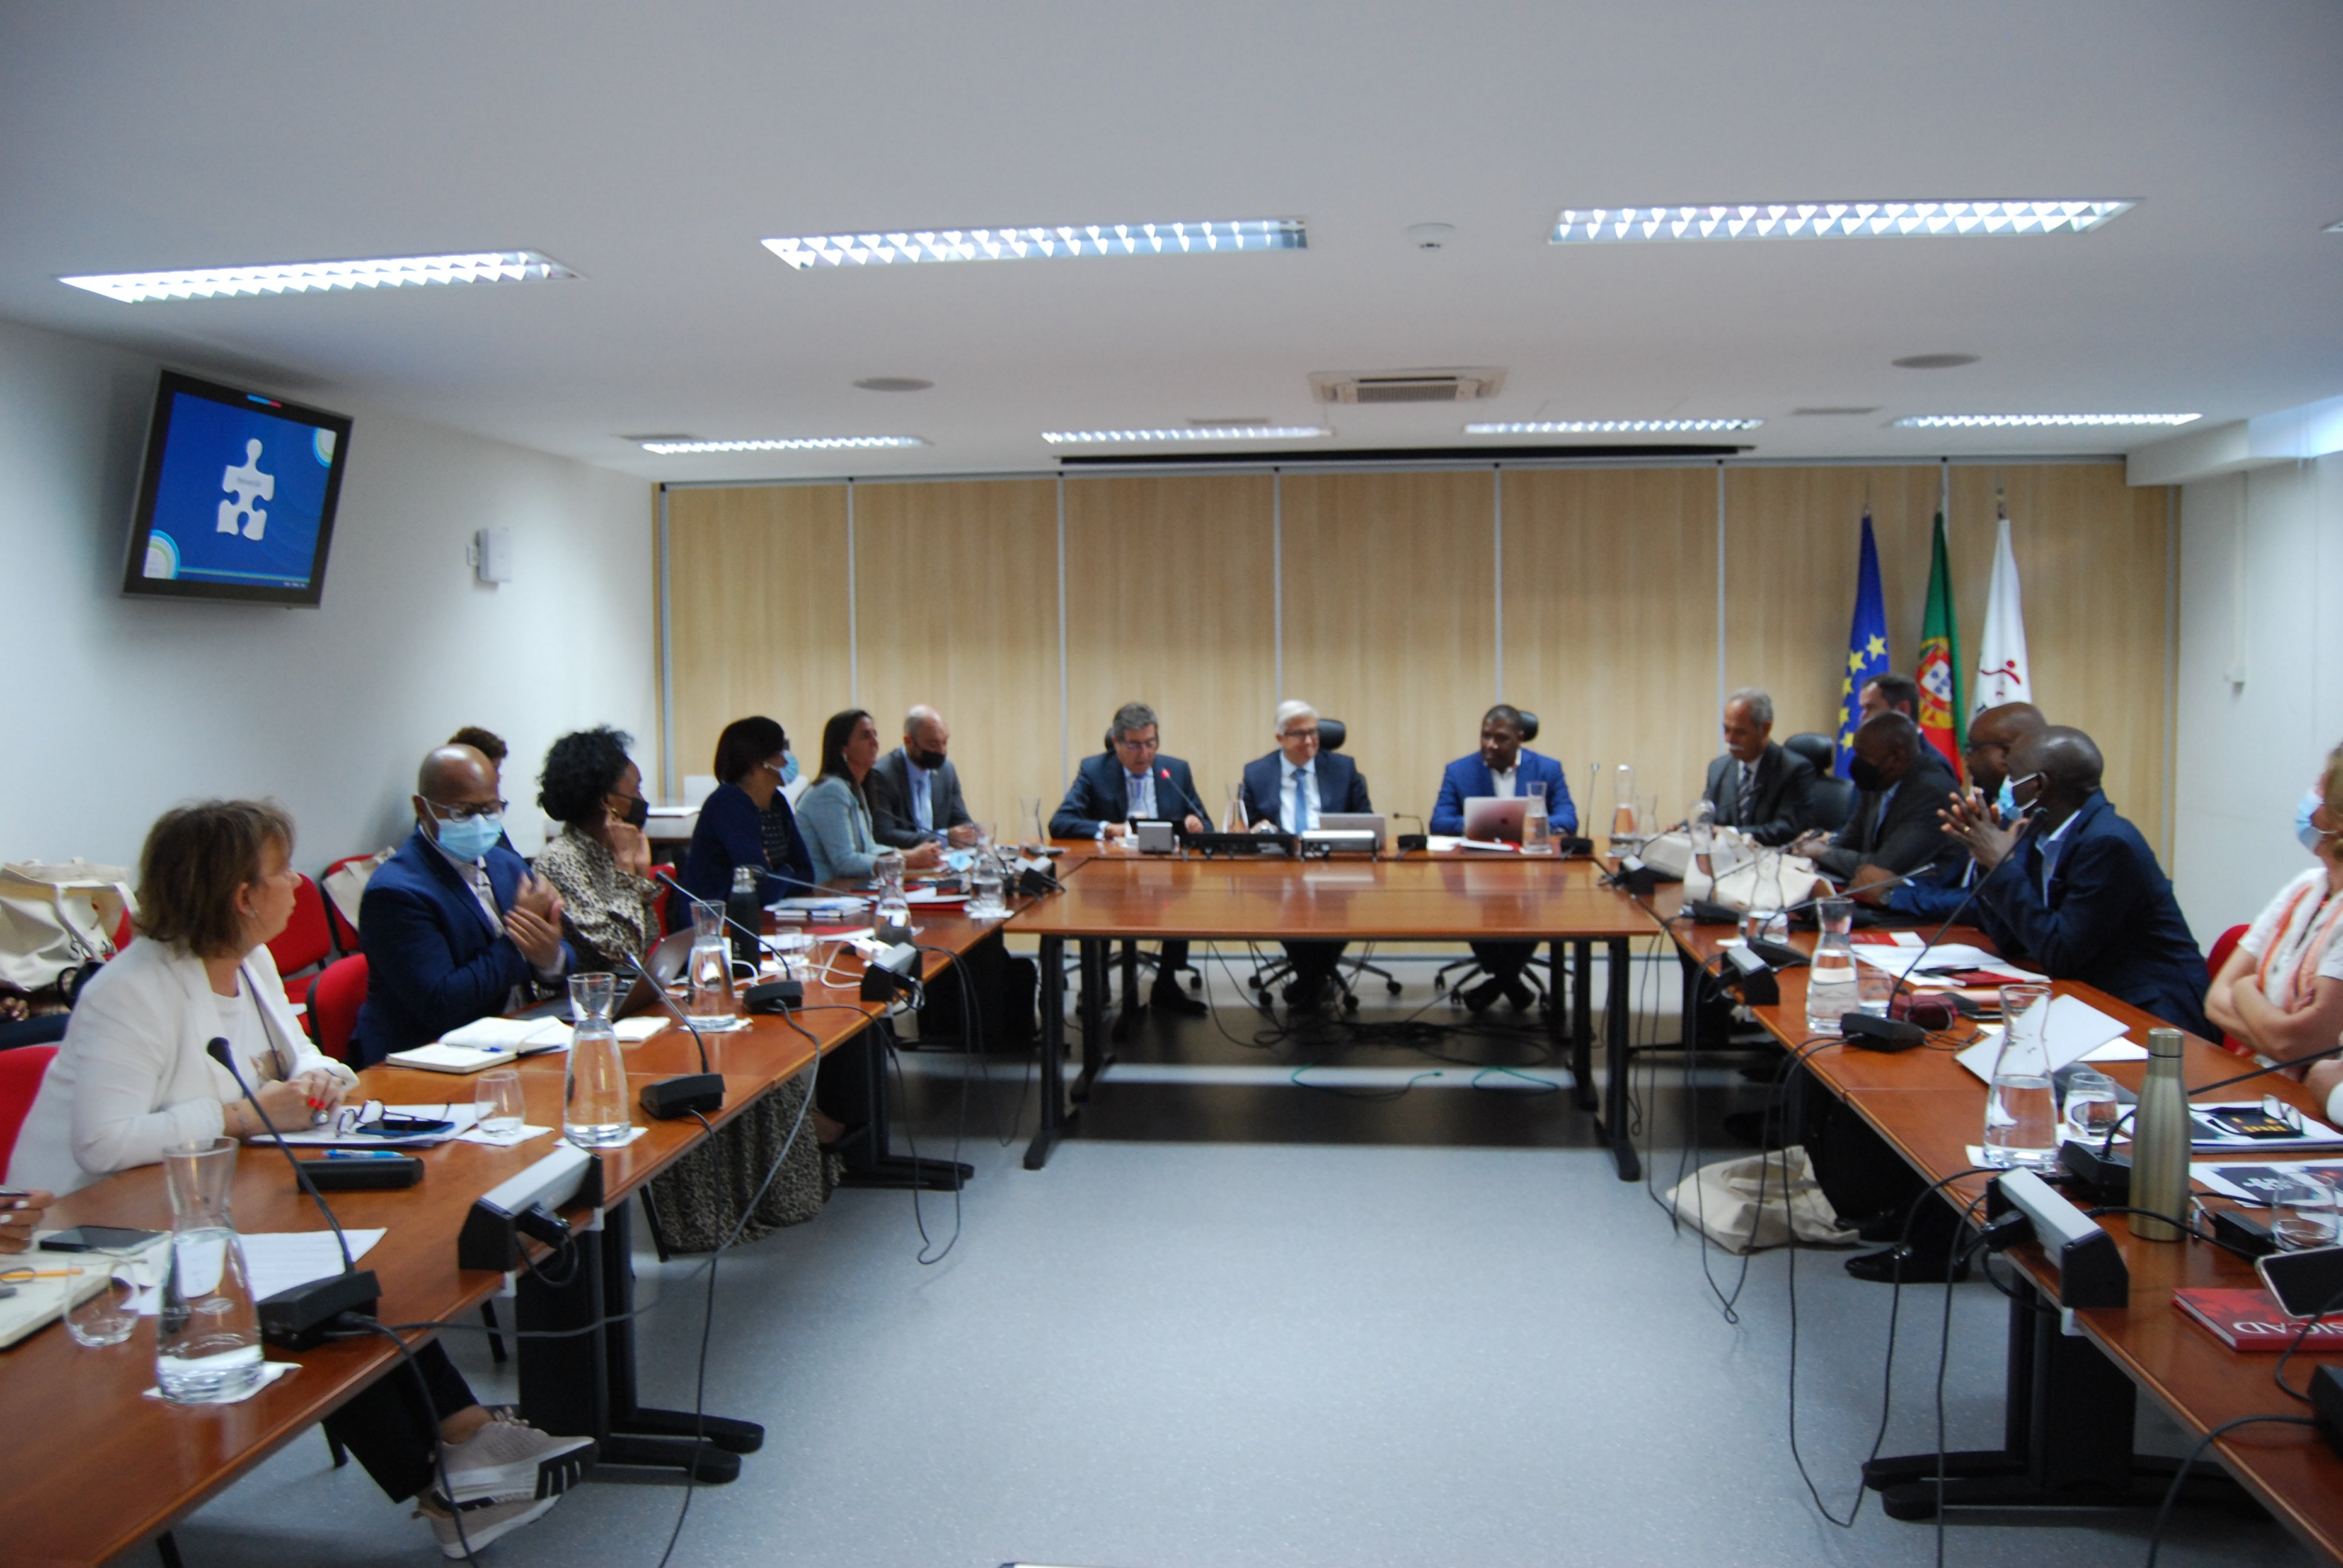 <span style="color: #999999;"><em>Portuguese and Mozambican officials working in the field of drug use prevention and treatment of drug disorders exchange best practices.</em></span>